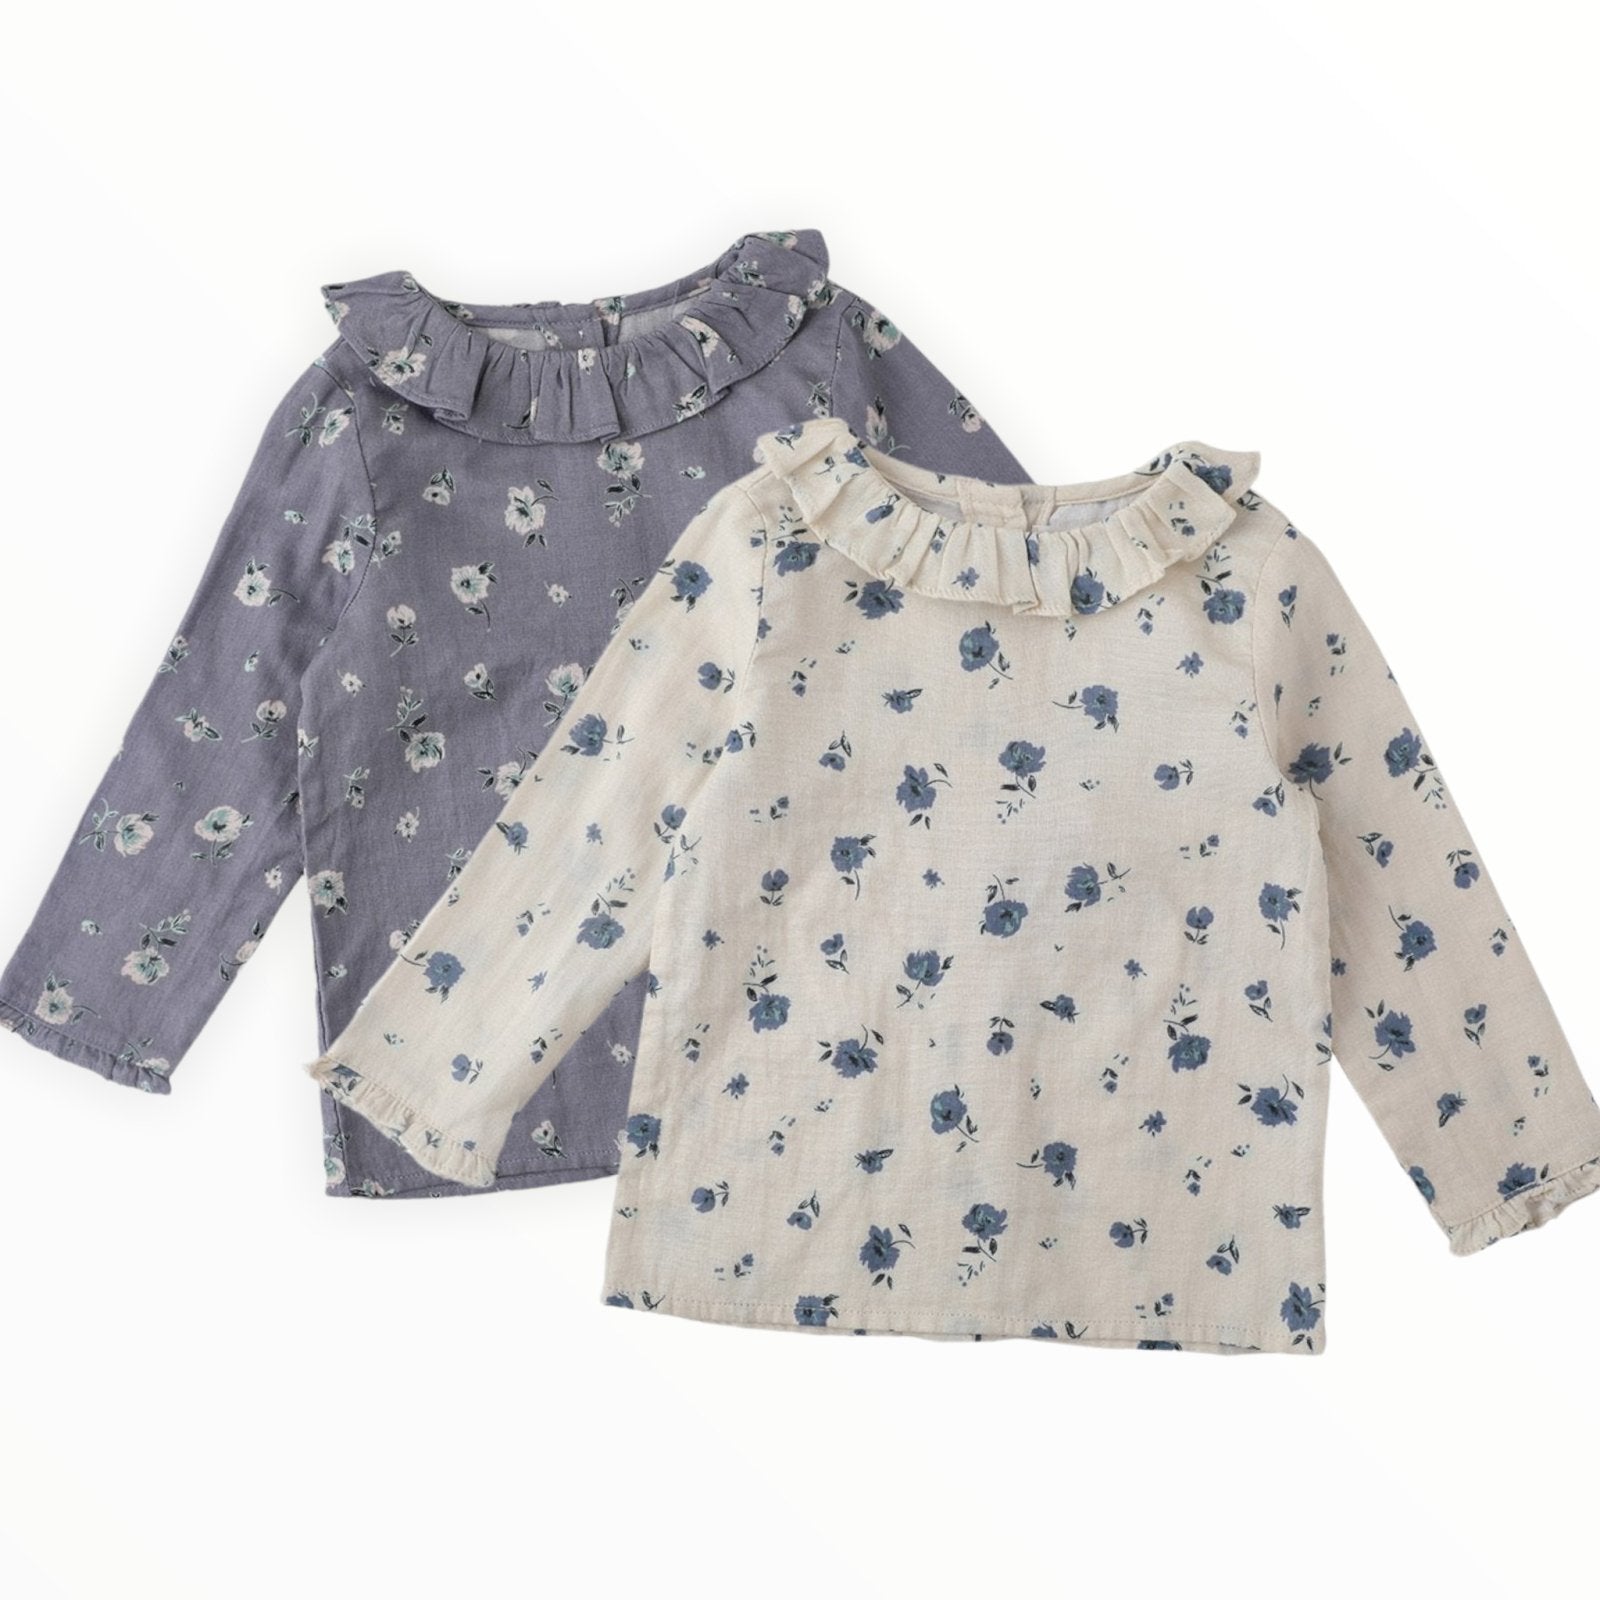 Water Lilly Bluse find Stylish Fashion for Little People- at Little Foxx Concept Store